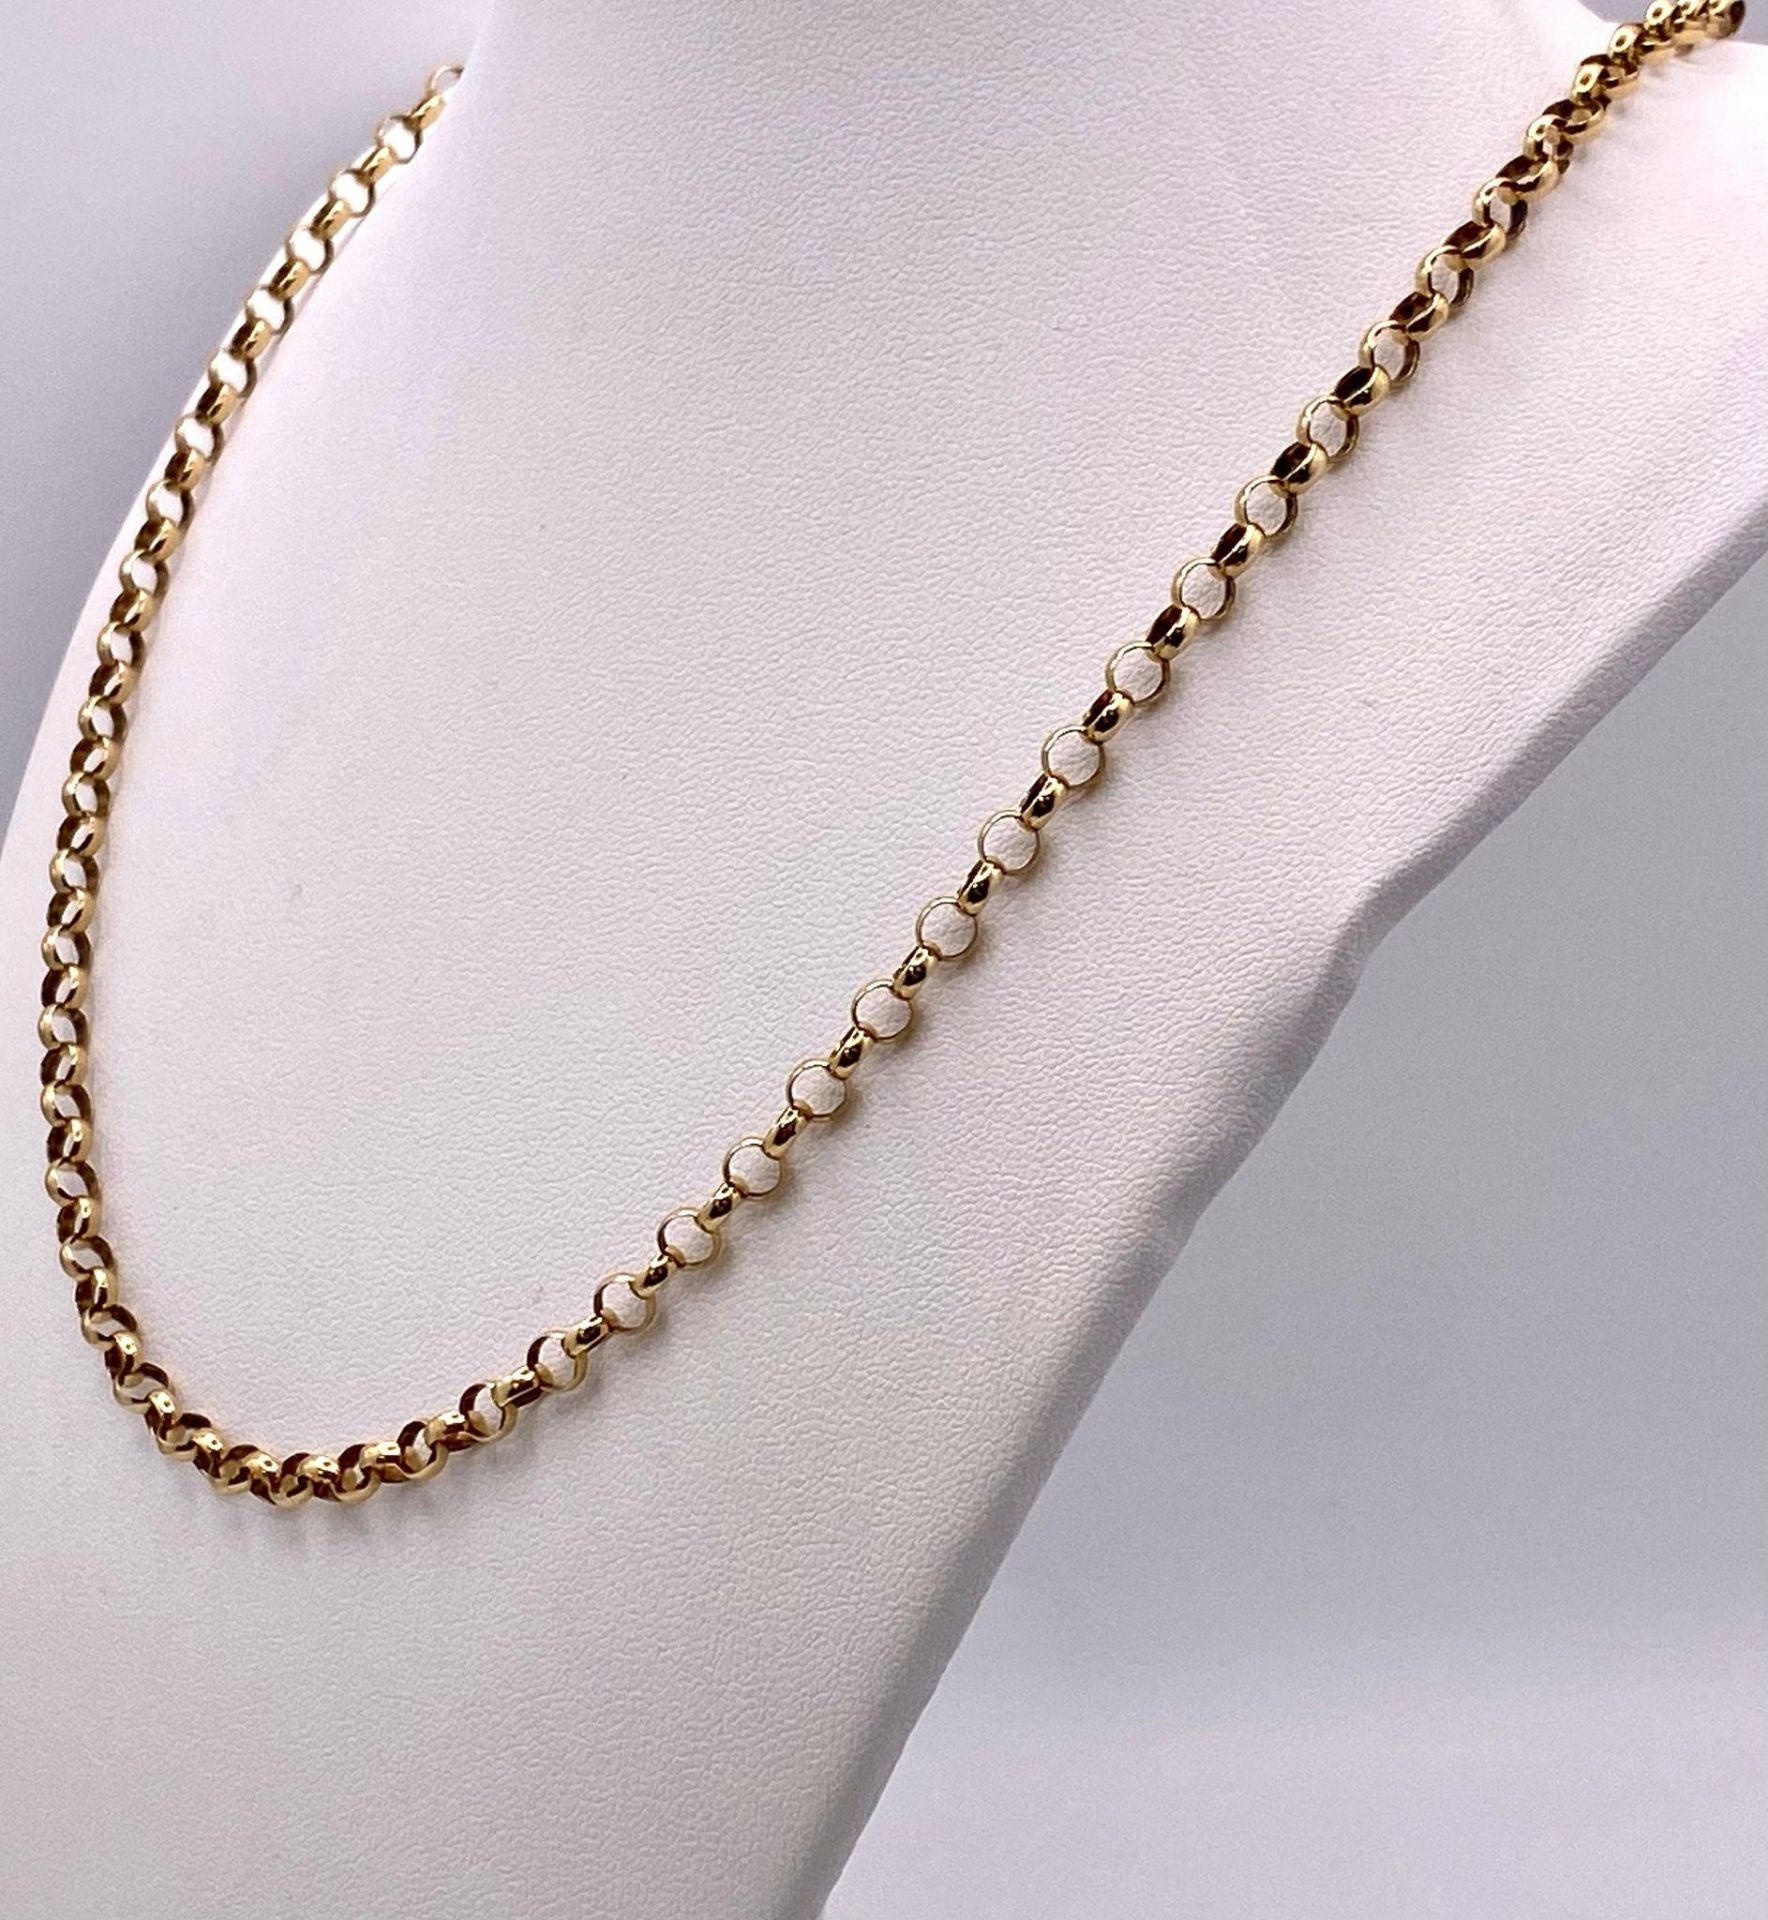 A 14K Yellow Gold Belcher Link Necklace. 52cm length. 11.66g weight. - Image 2 of 5